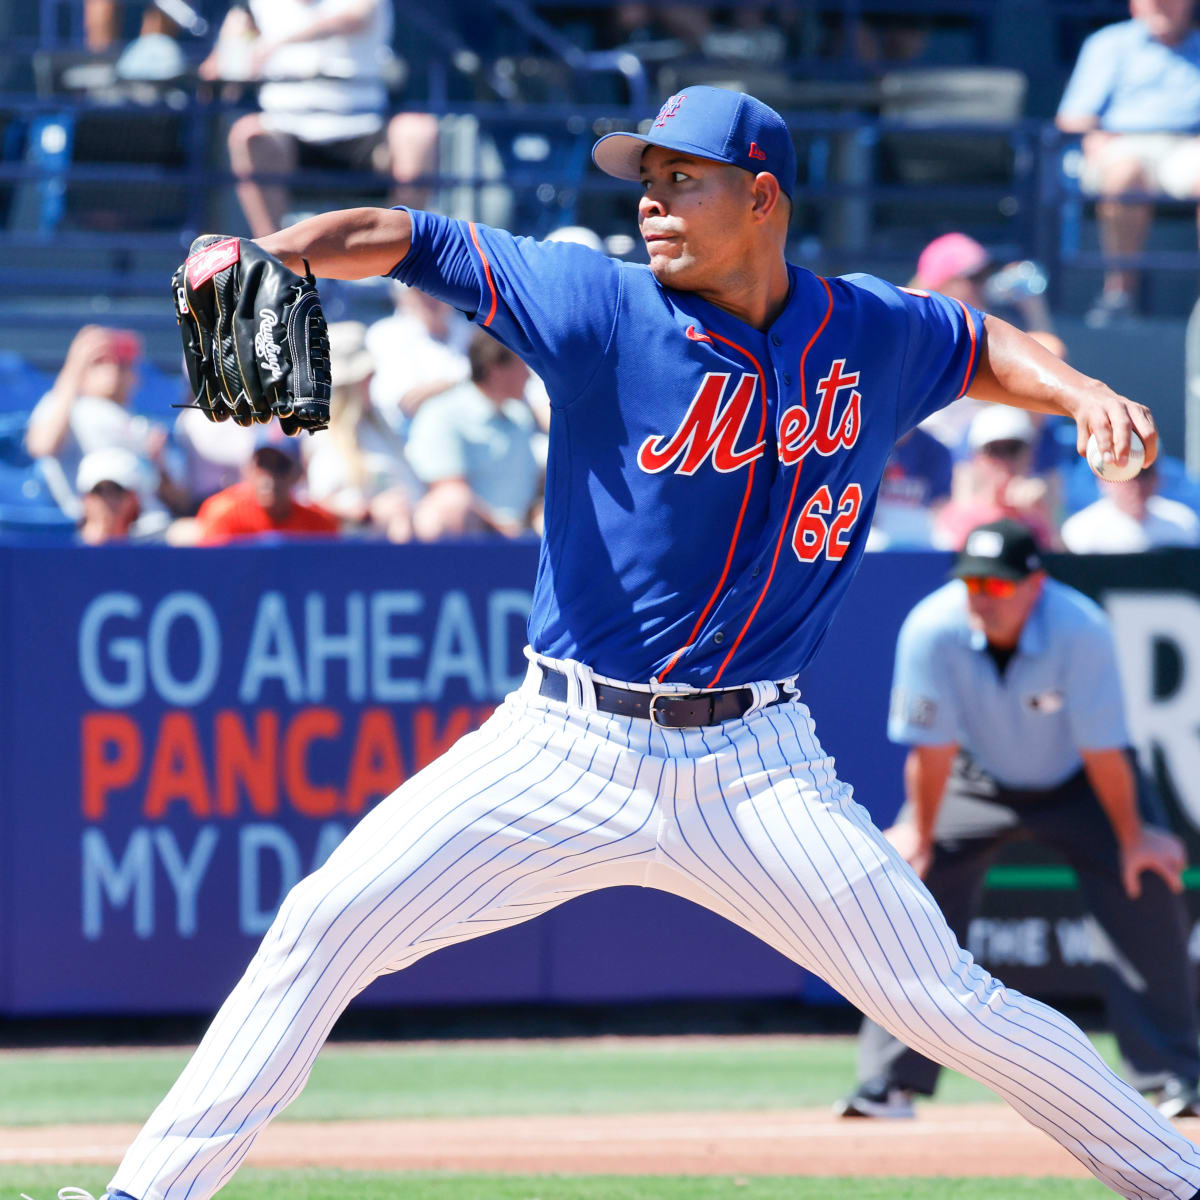 Mets' Jose Quintana set for rehab start on Friday, could join